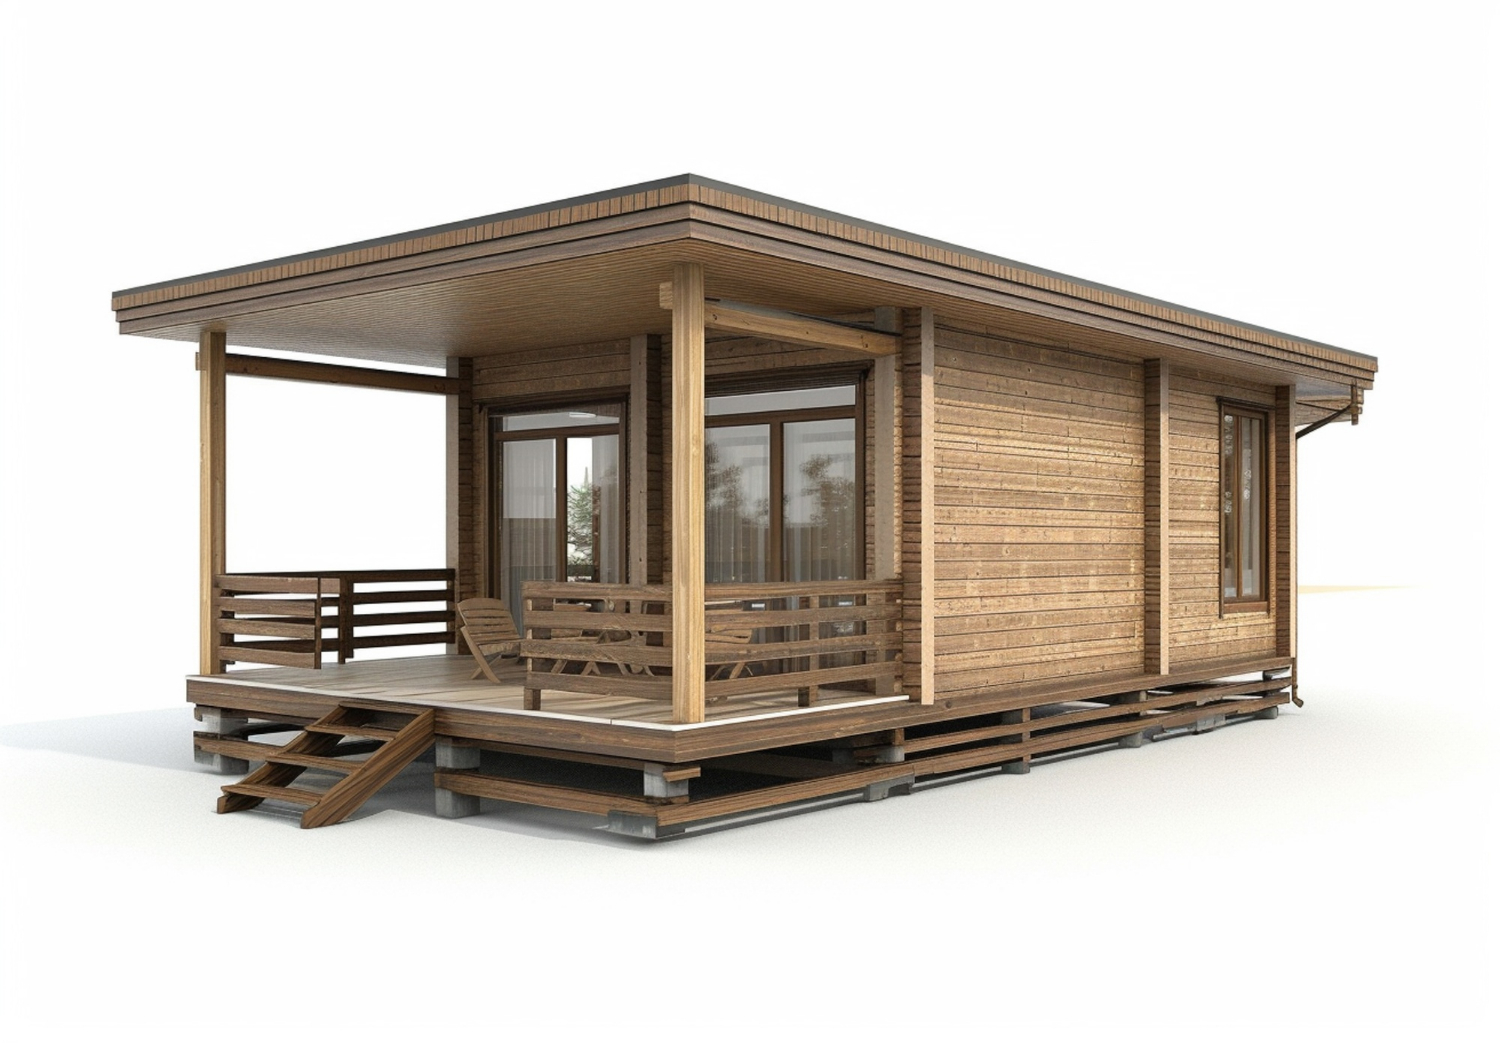 What Makes Ryan’s Shed Plans the Ultimate Solution for DIY Enthusiasts?